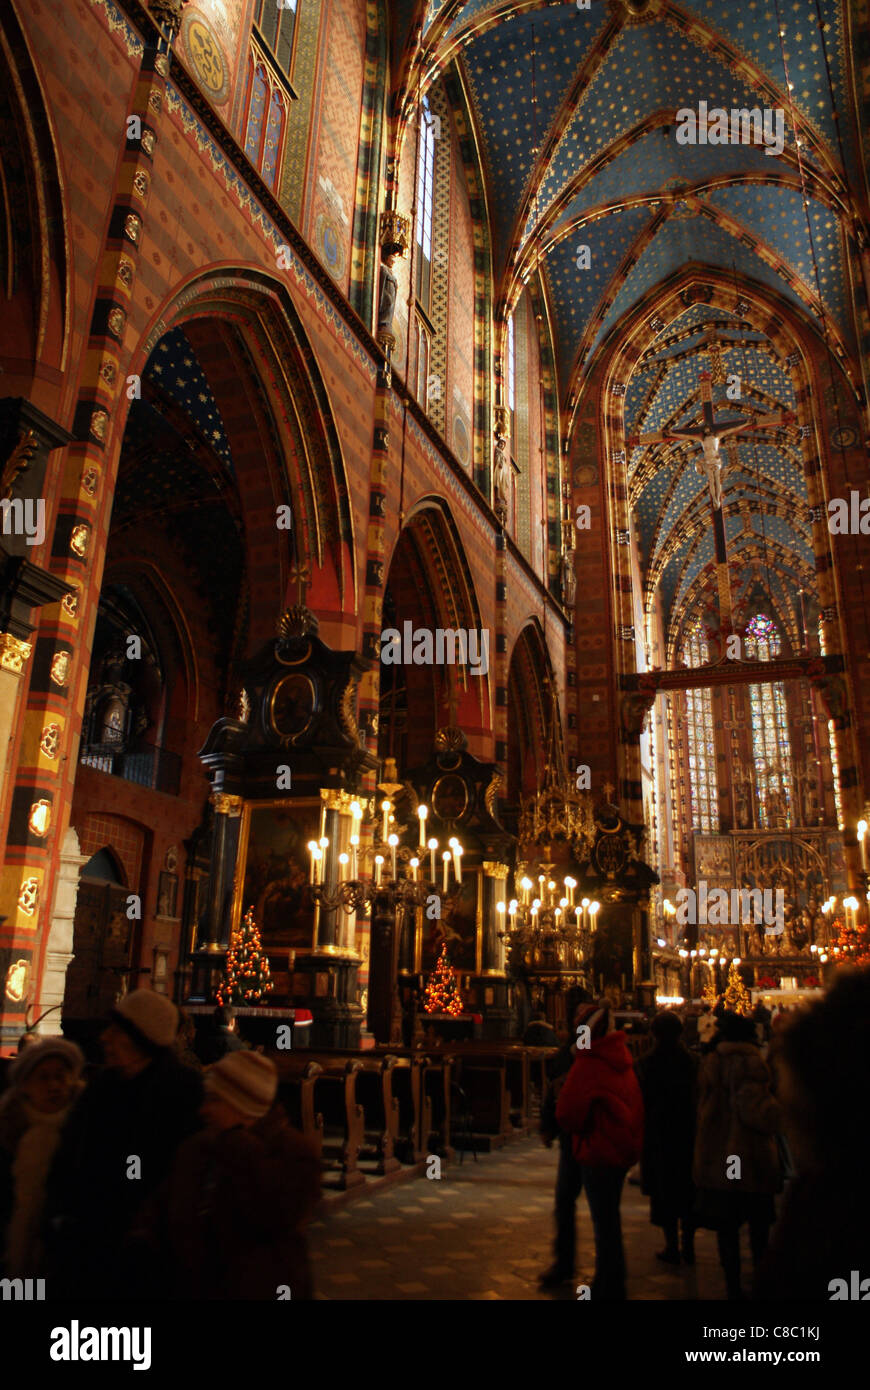 Interior of main nave in Mariacki Basilica in Cracow and outstanding polychrome created by Jan Matejko. Stock Photo